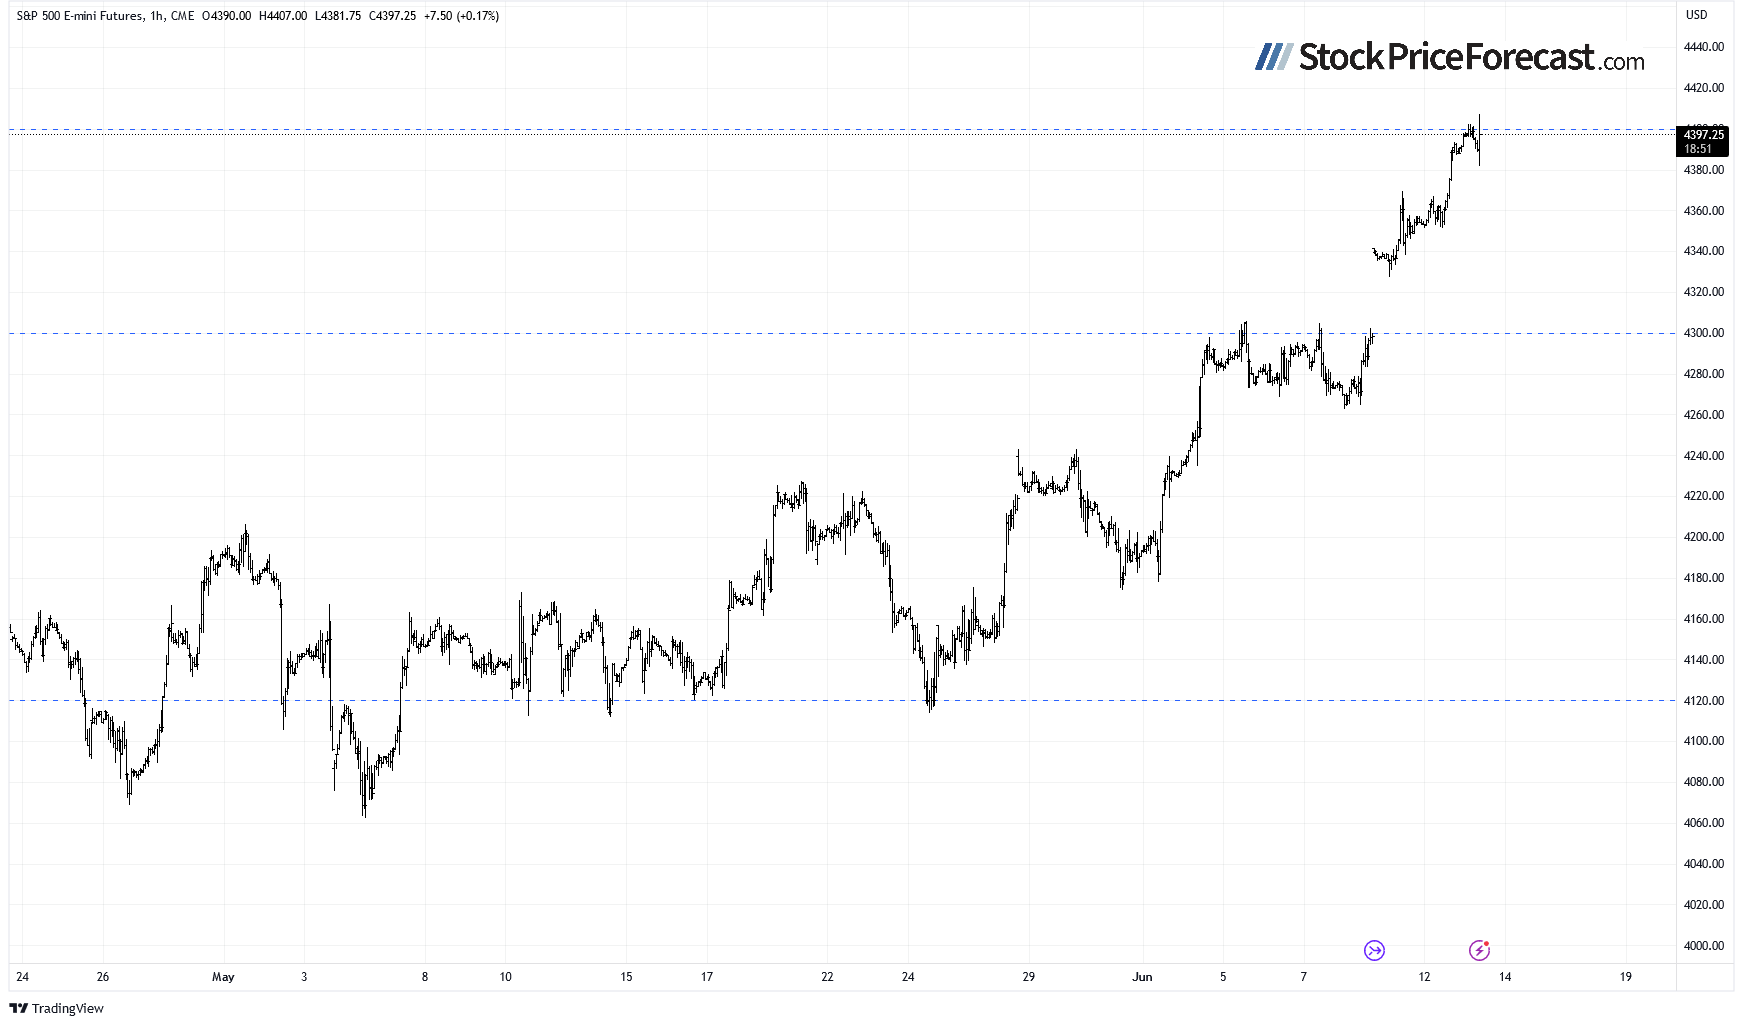 S&P 500 Futures 1-Hr Chart